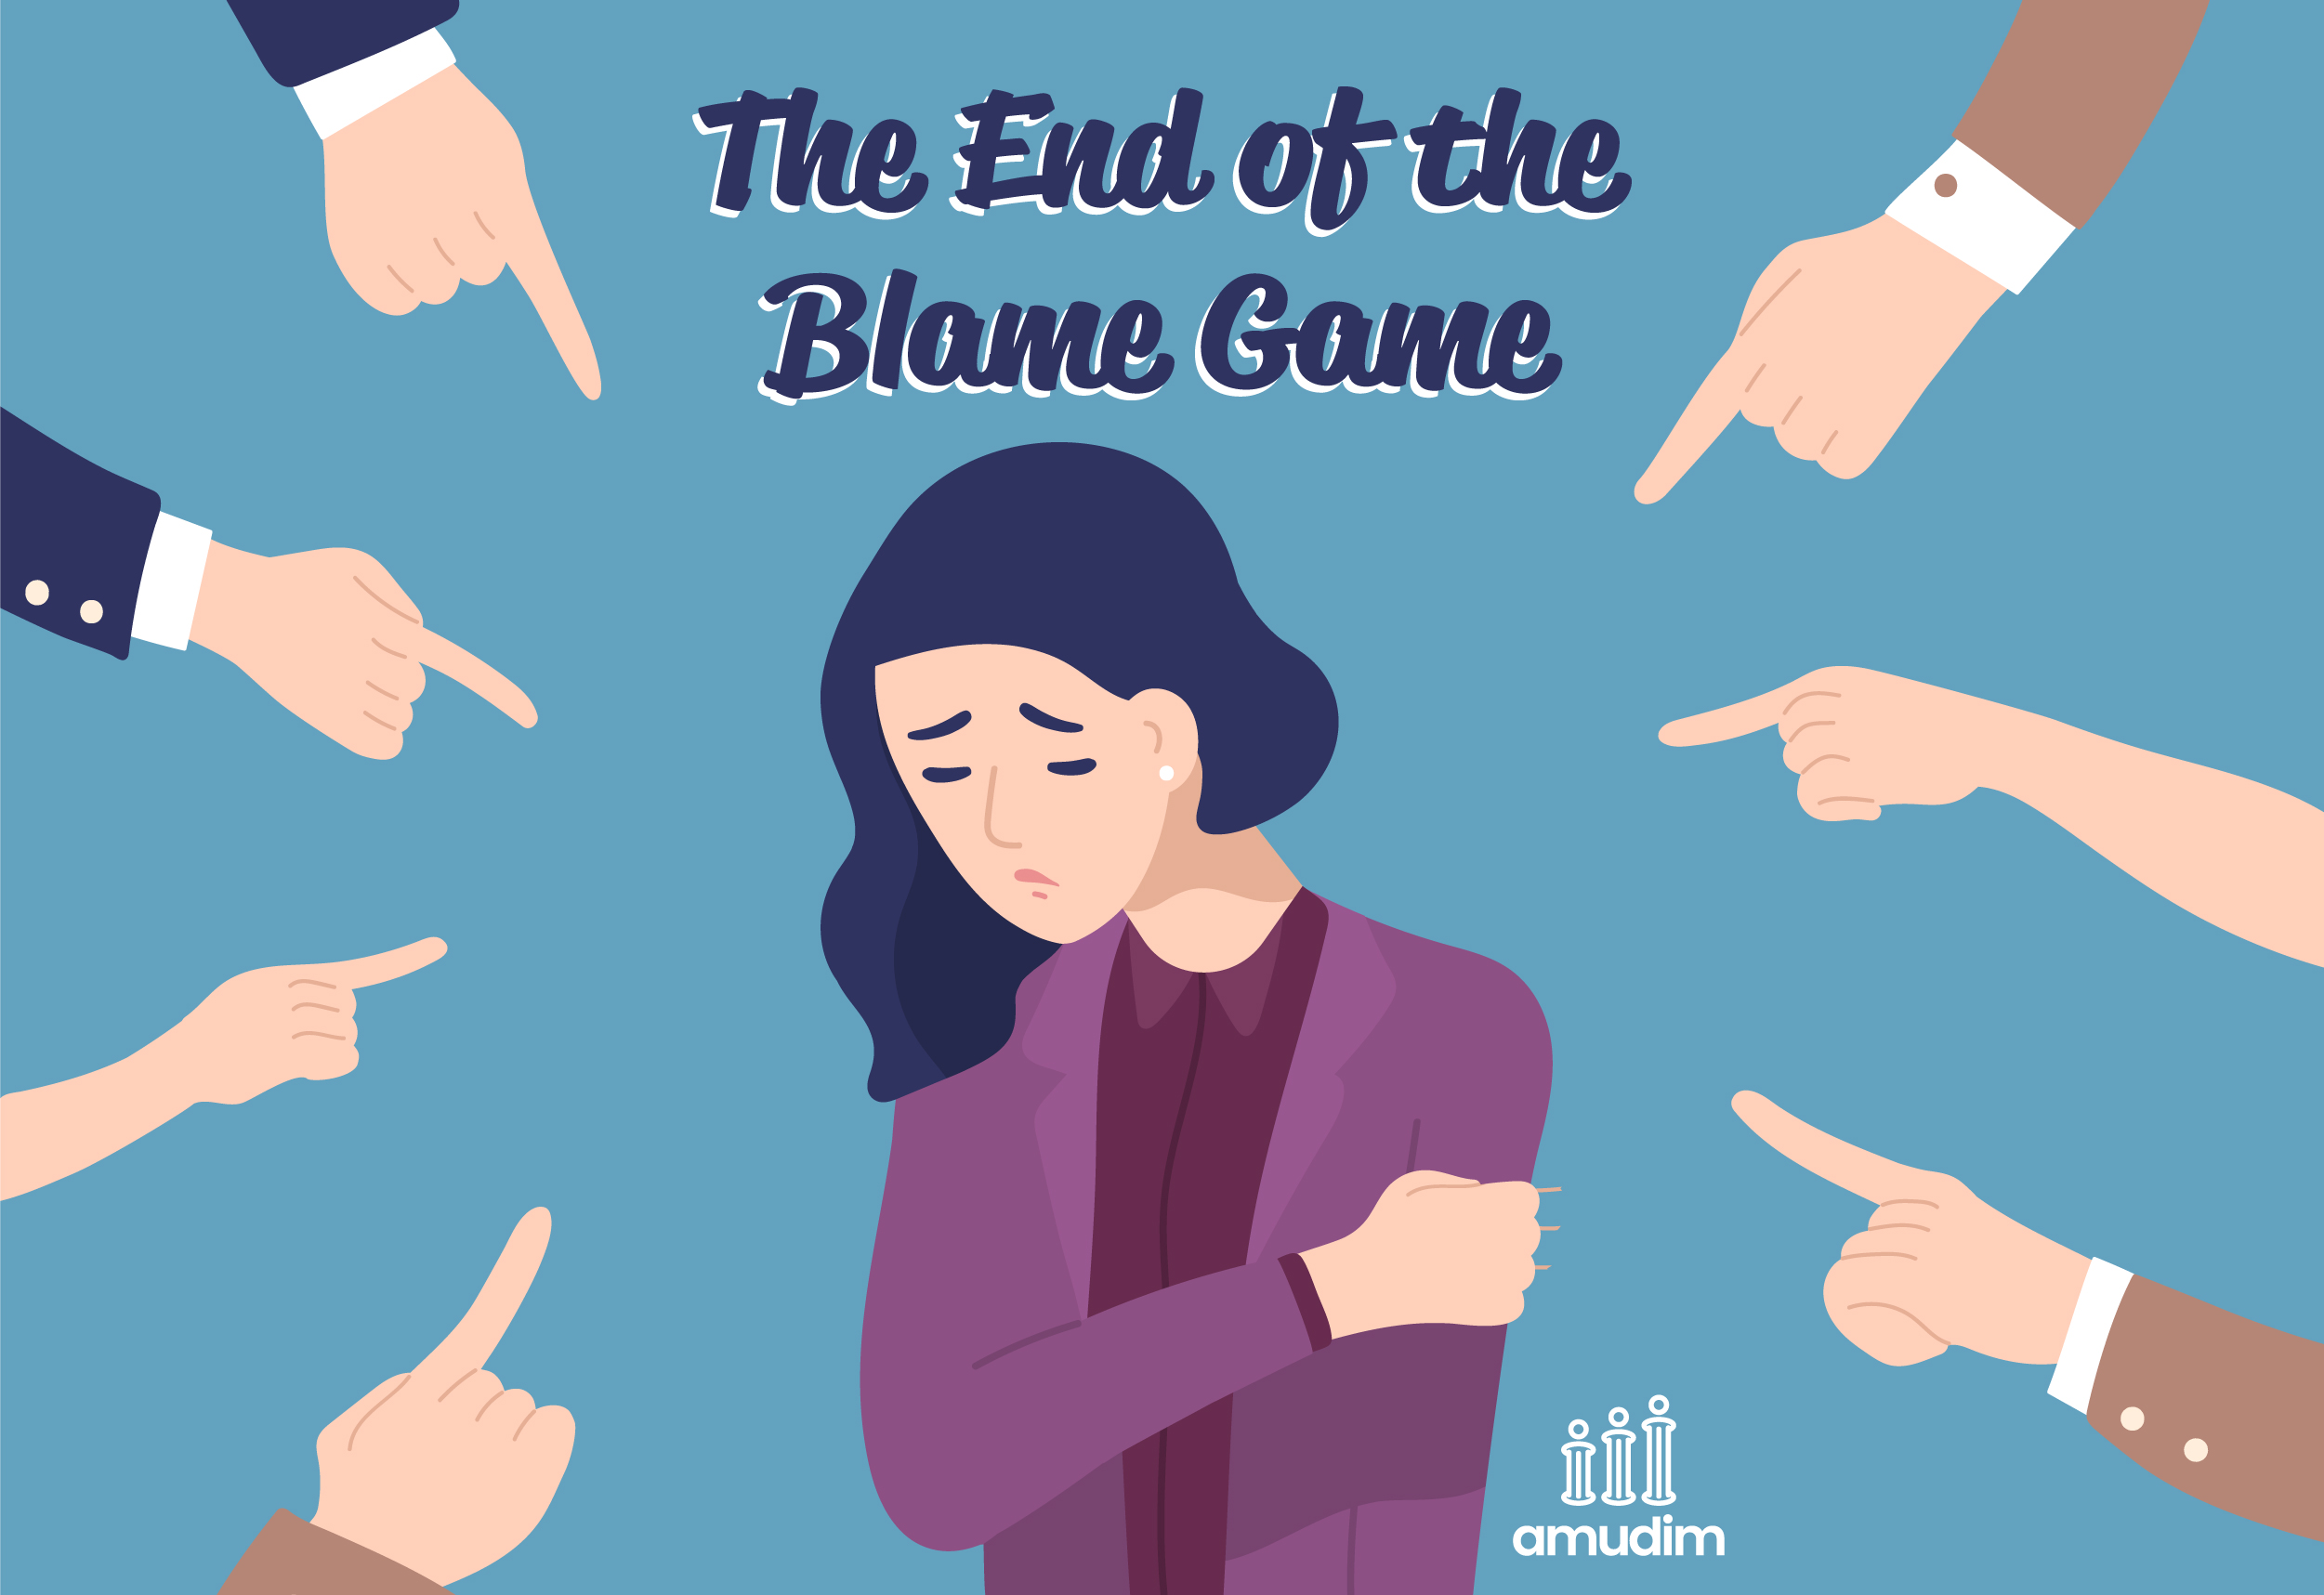 The End of the Blame Game